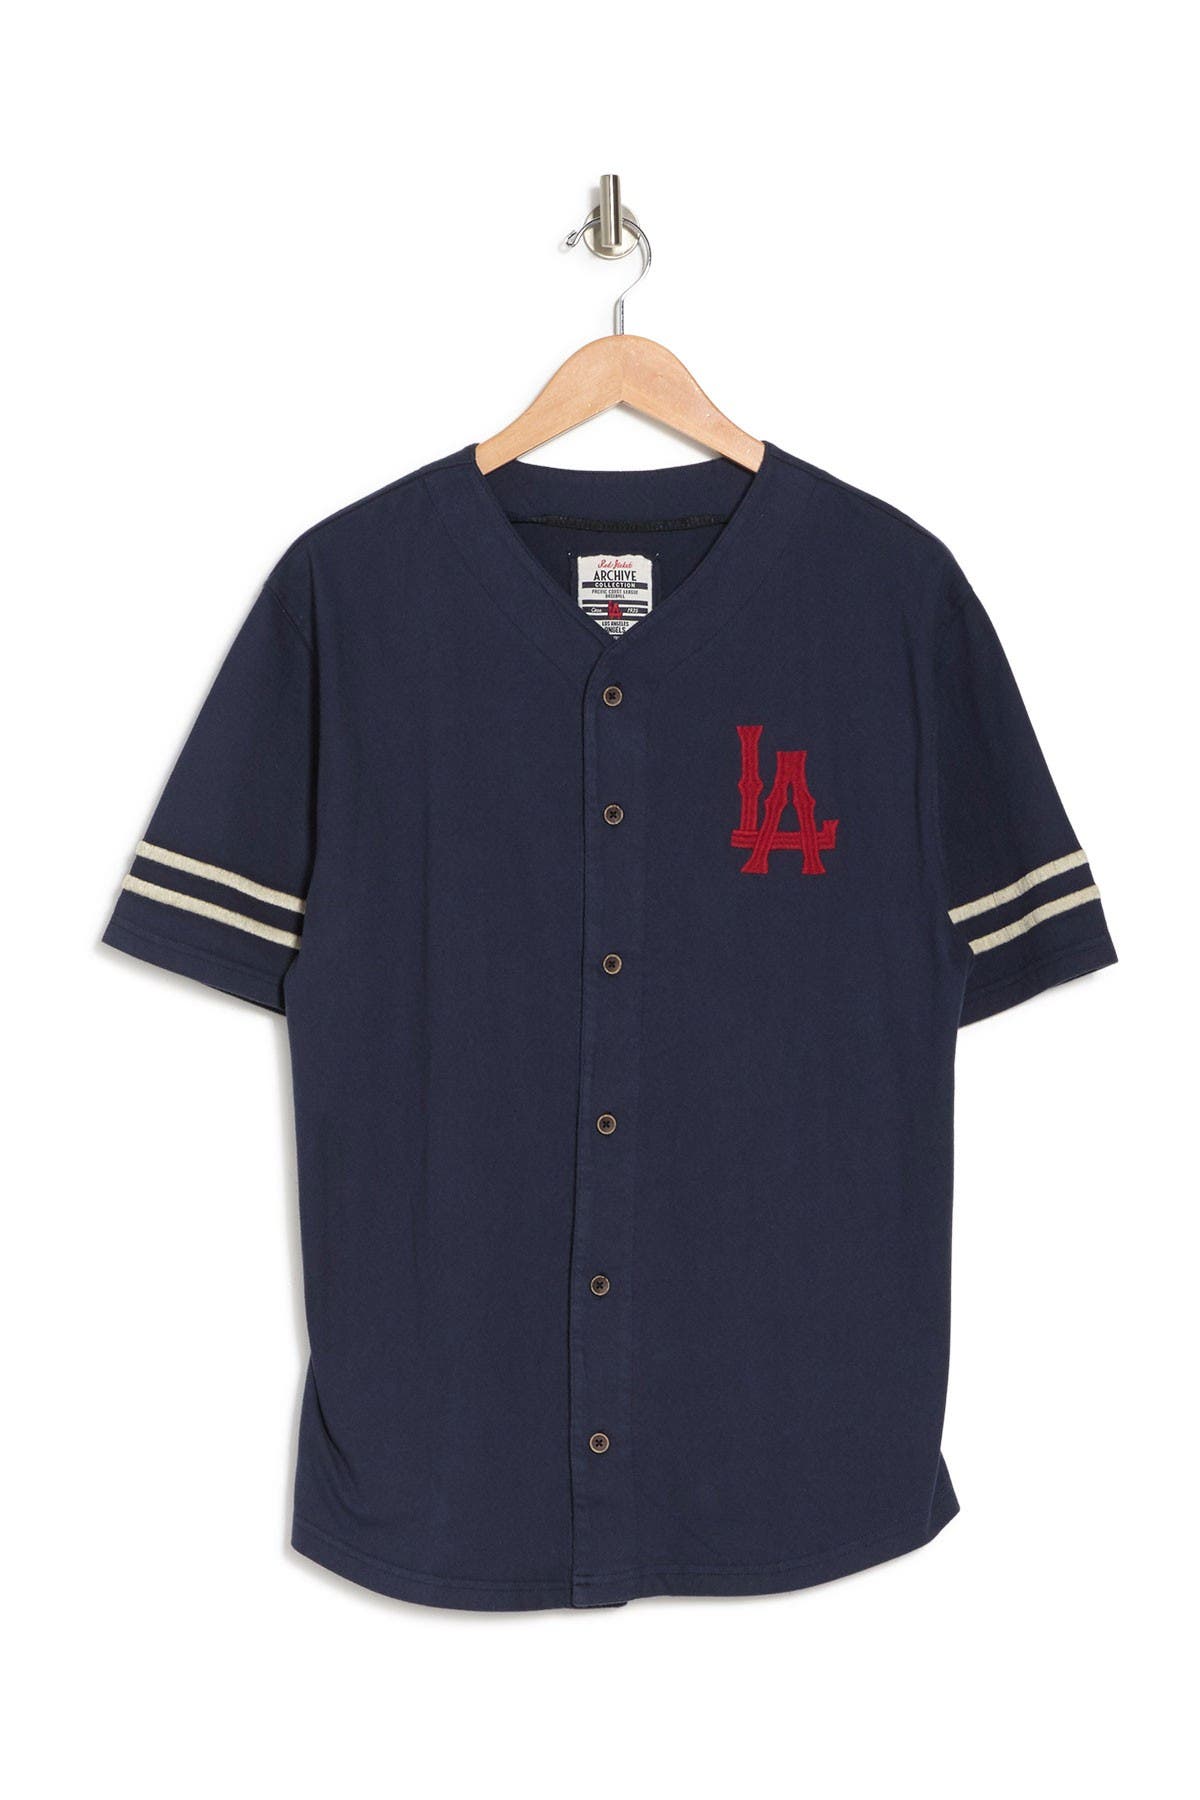 American Needle Archive Los Angeles Angels Jersey In Navy